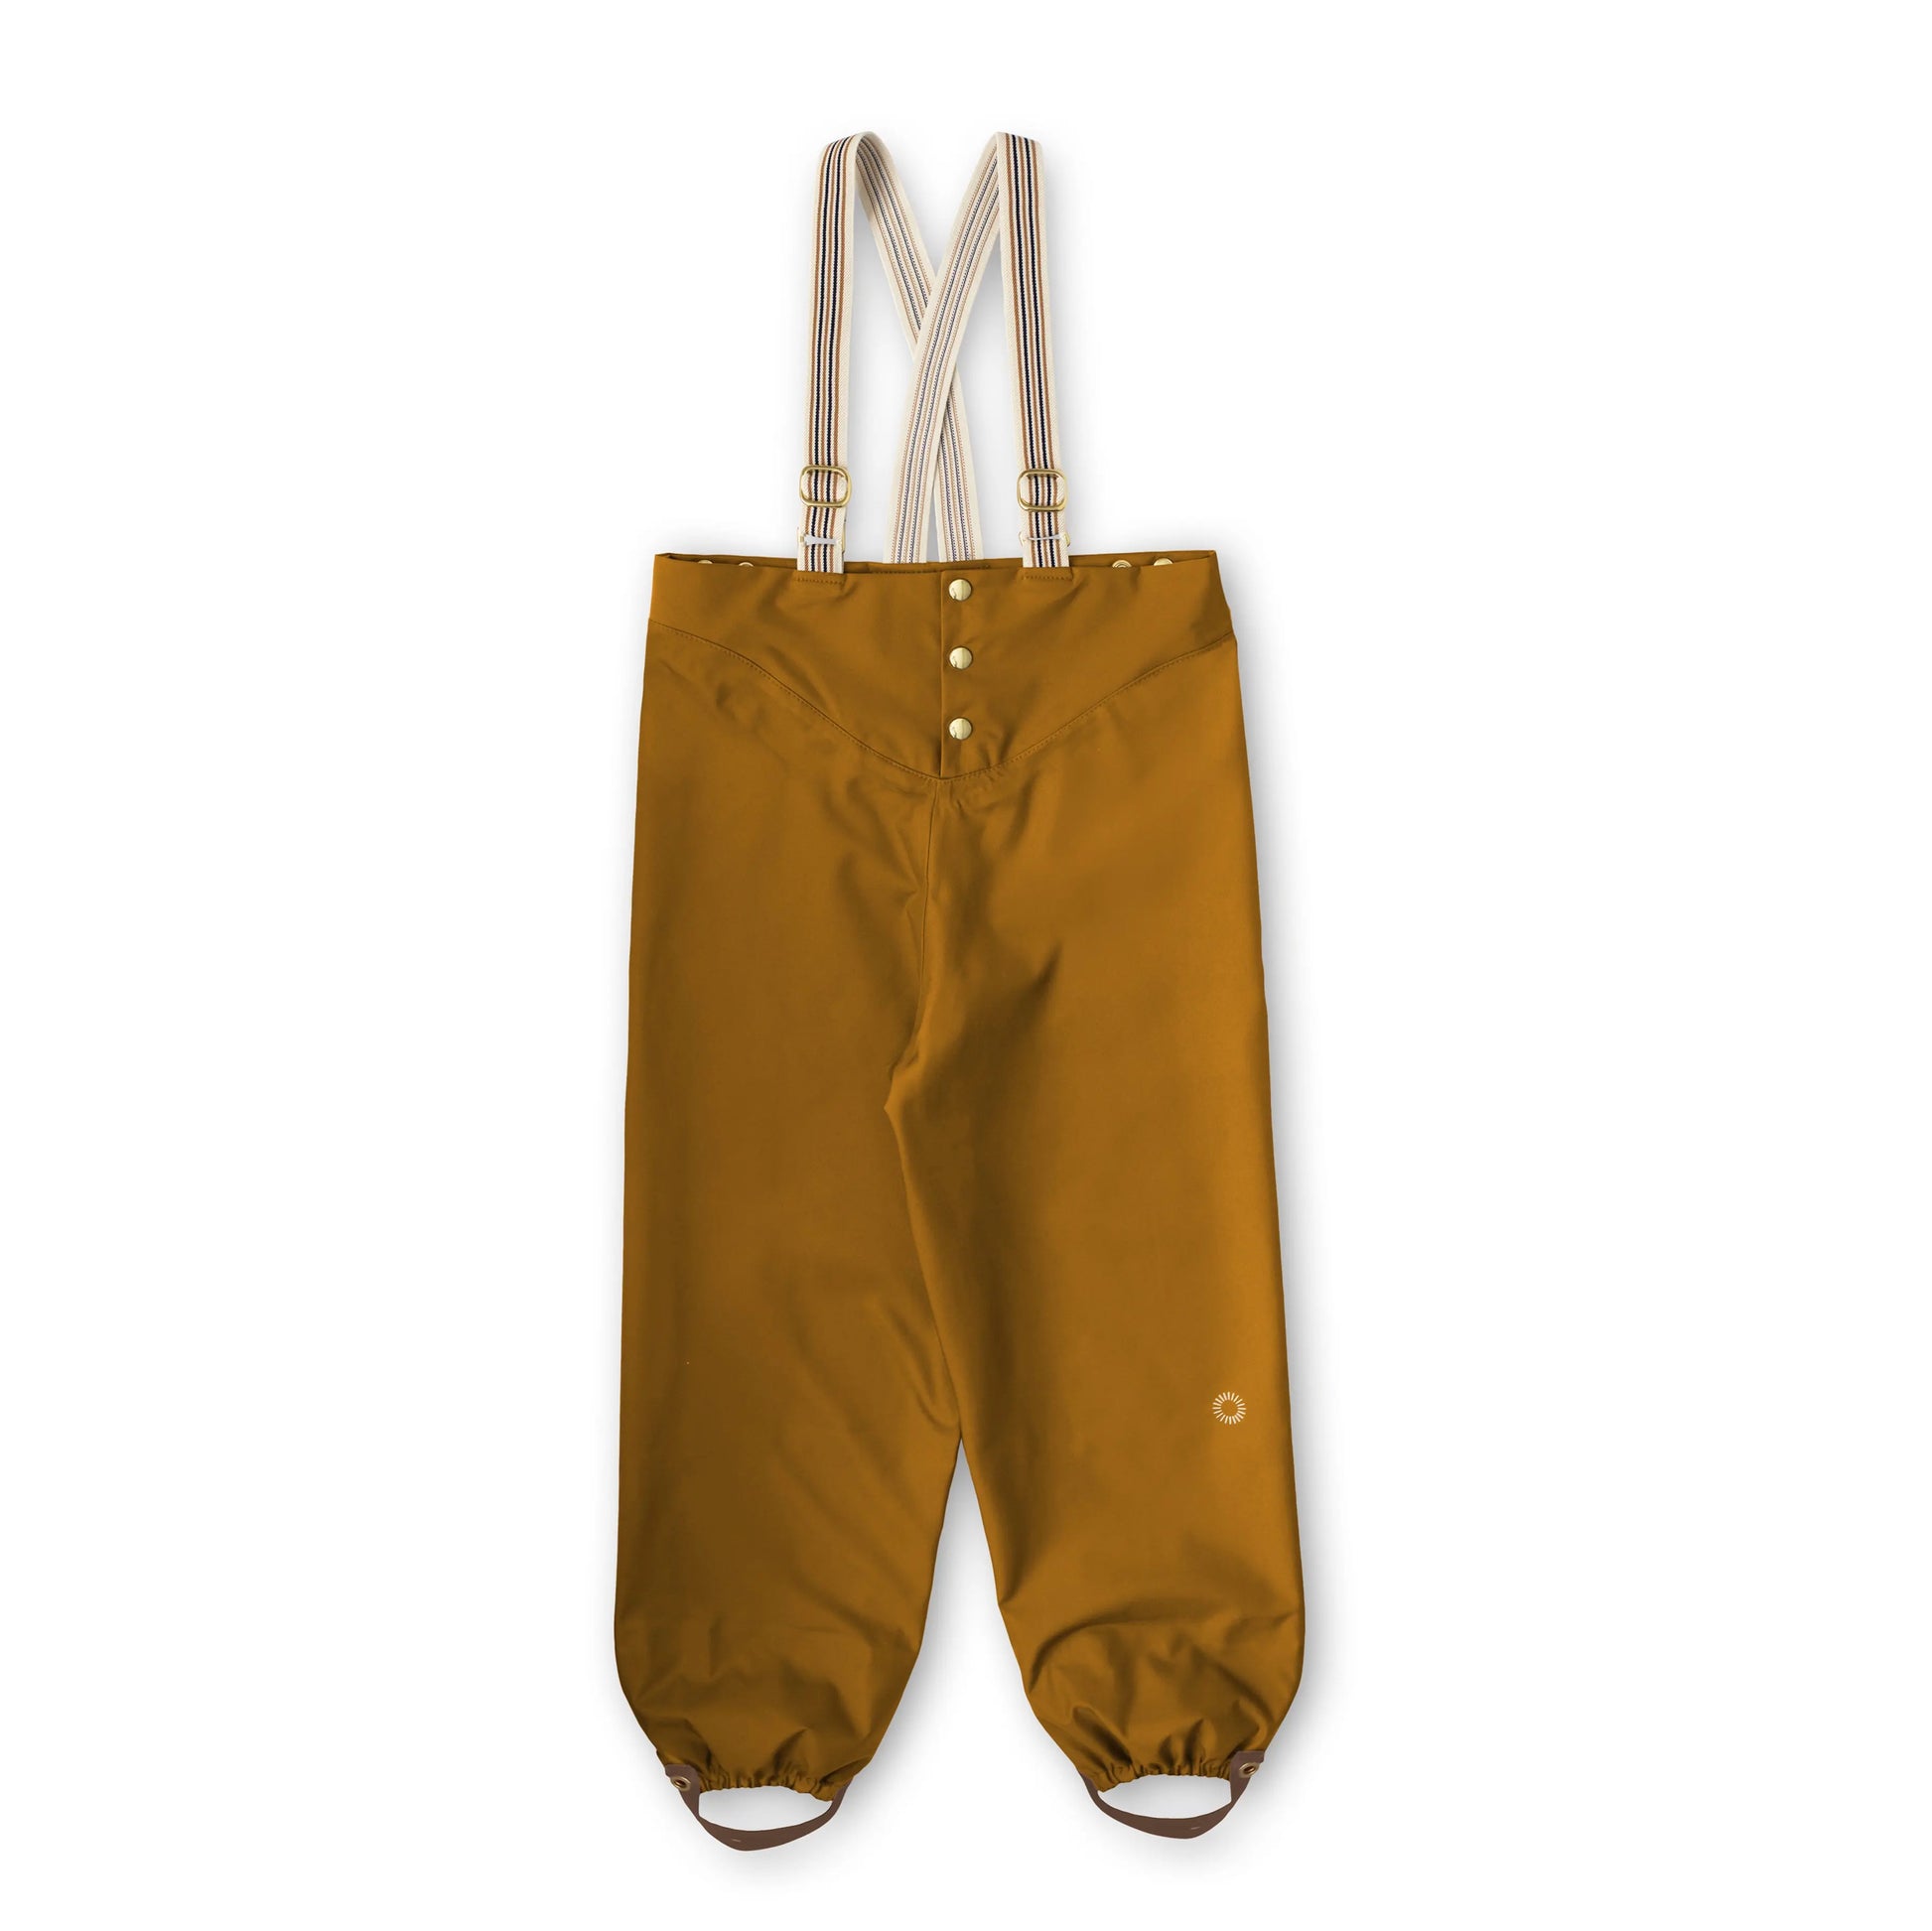 Made for children with a penchant for puddle jumping, the Rain Pants are inspired by French under trousers. The brass snaps open at the waistline to support independent dressing and there are several adjustable features: the suspenders, waistband and stirrups. This waterproof design fits at least three sizes and accommodates warm under-layers, so your child has the freedom to explore while staying cozy and dry. 